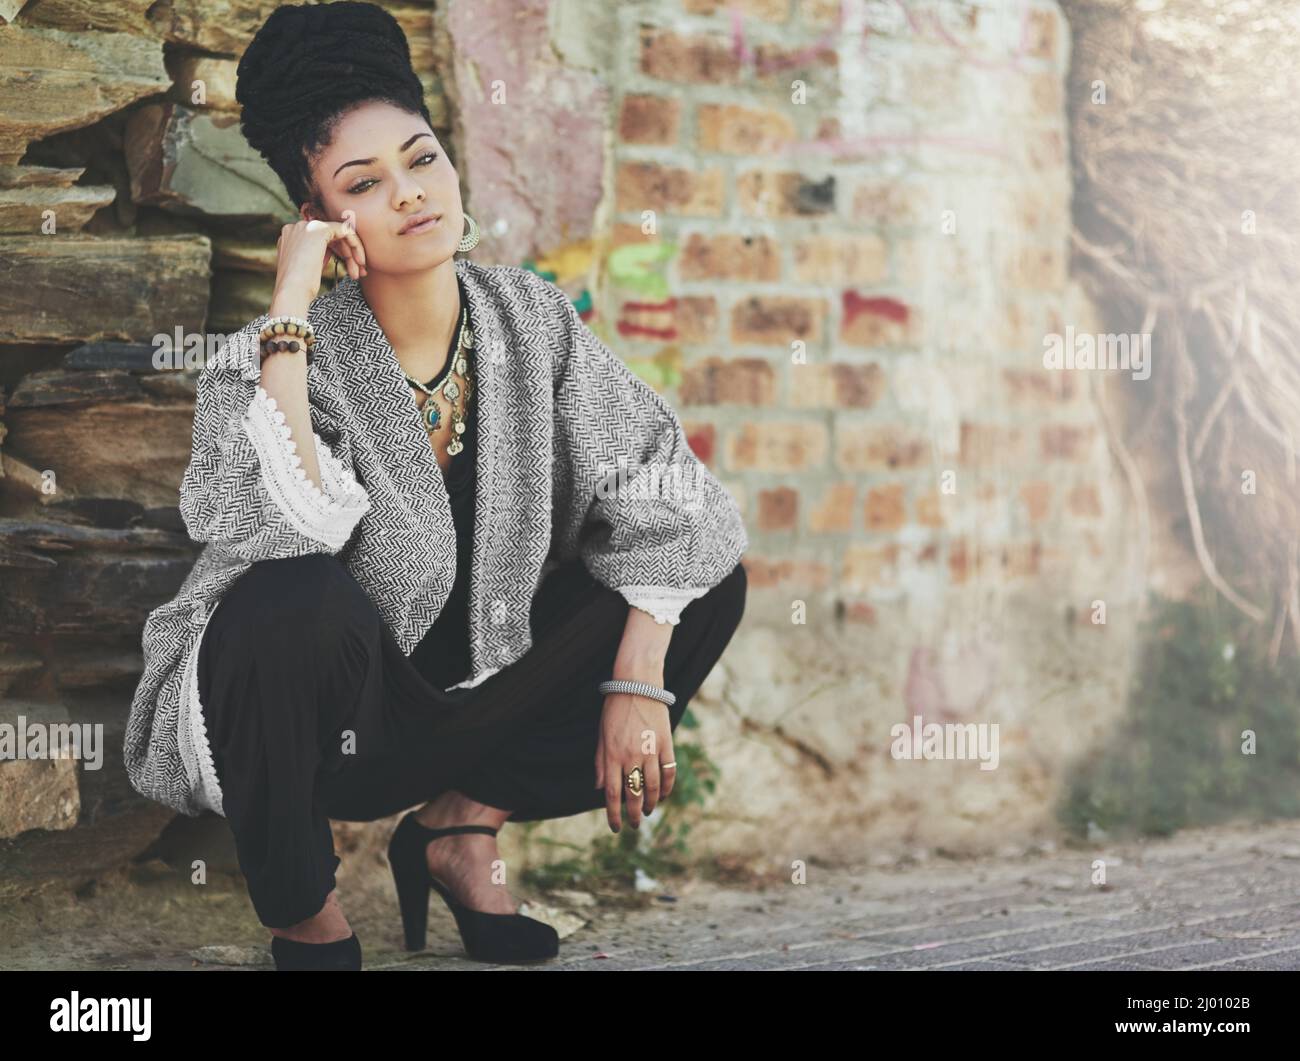 High heels, high hopes. Full length shot of a fashionable young woman crouching against a wall. Stock Photo